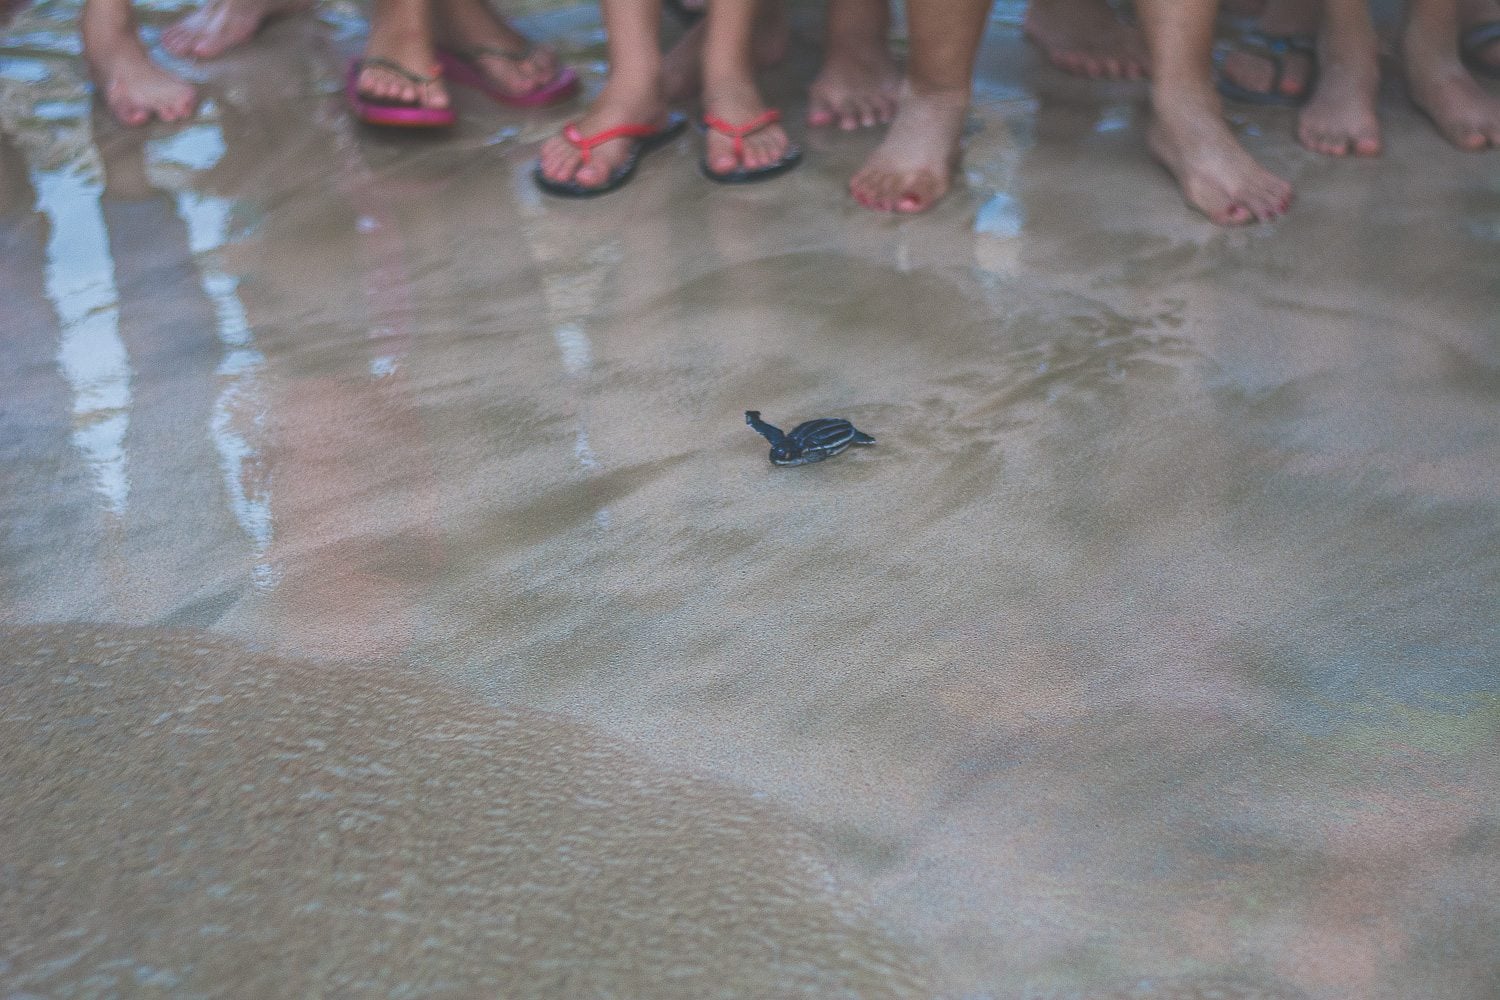 The Crowd observing the Hatchling attempting to reach the water.